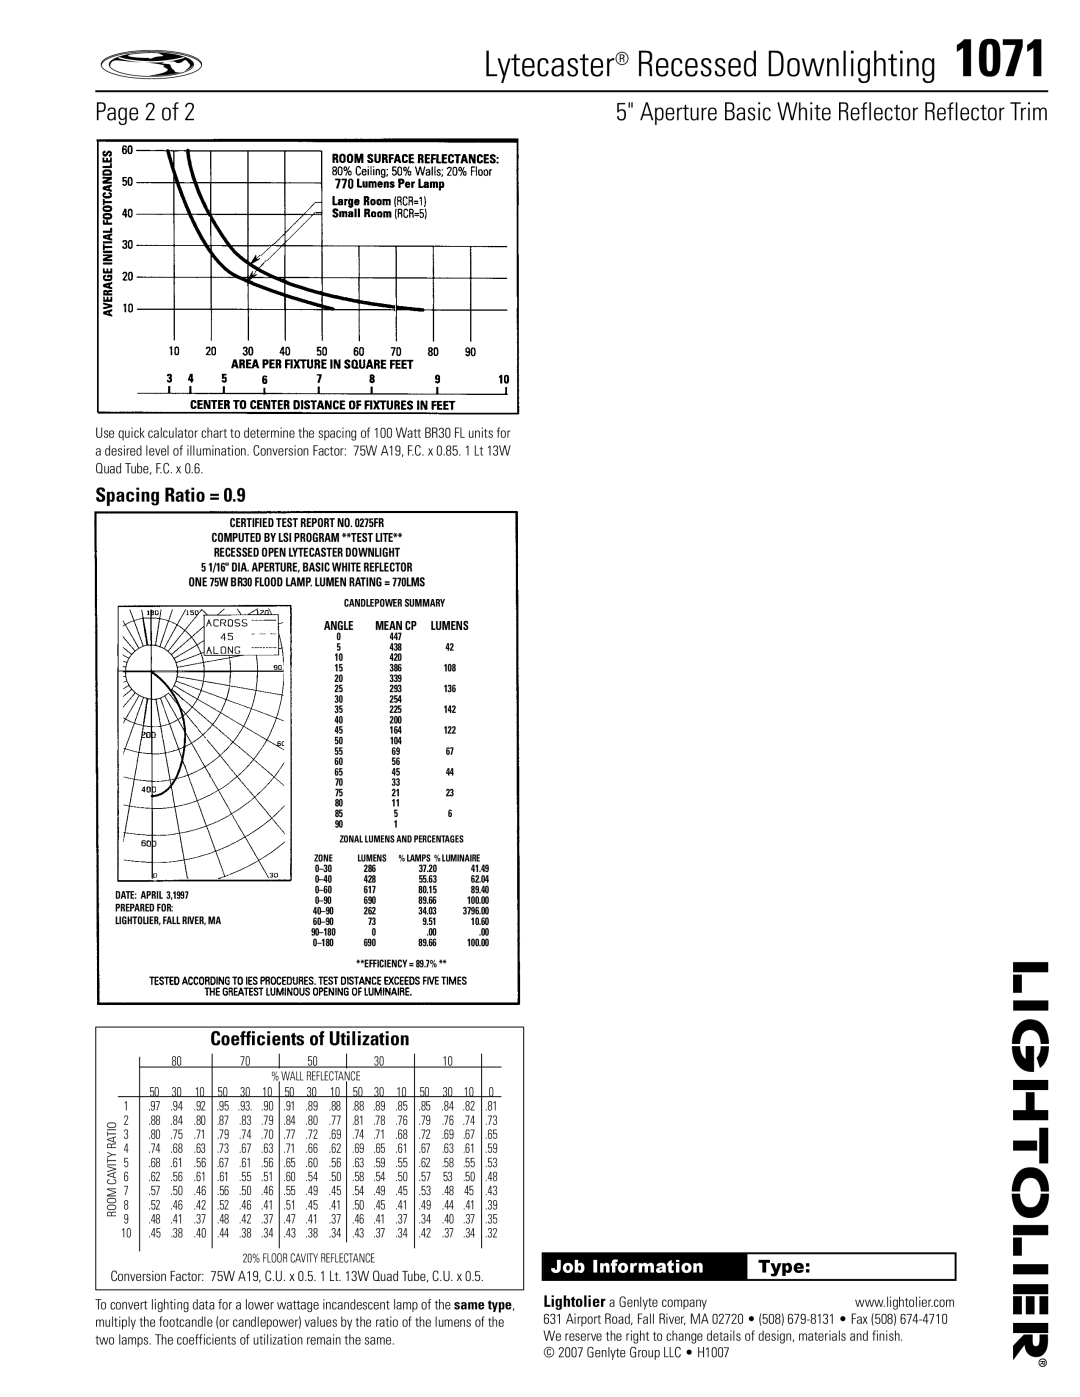 Lightolier 1071 Page 2 of, Aperture Basic White Reflector Reflector Trim, Spacing Ratio =, Coefficients of Utilization 